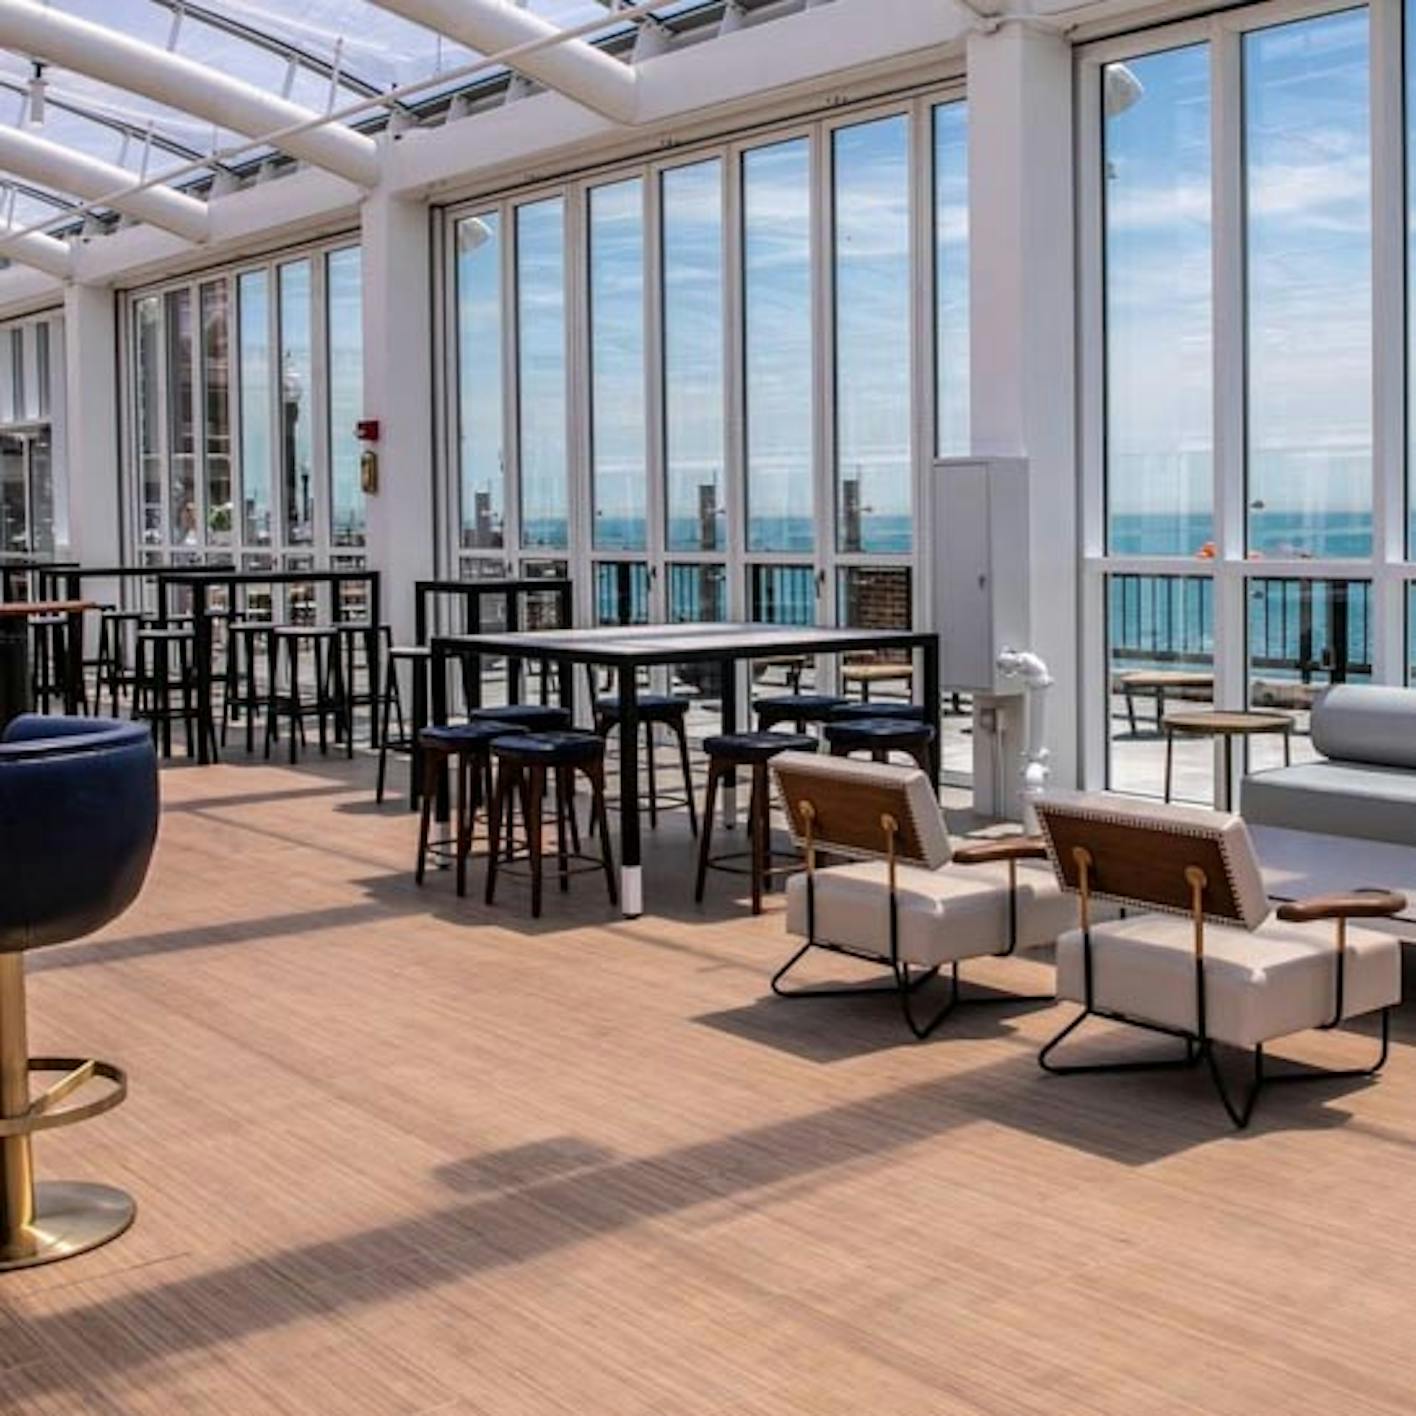 Offshore on Chicago’s Navy Pier is the world’s largest rooftop bar.